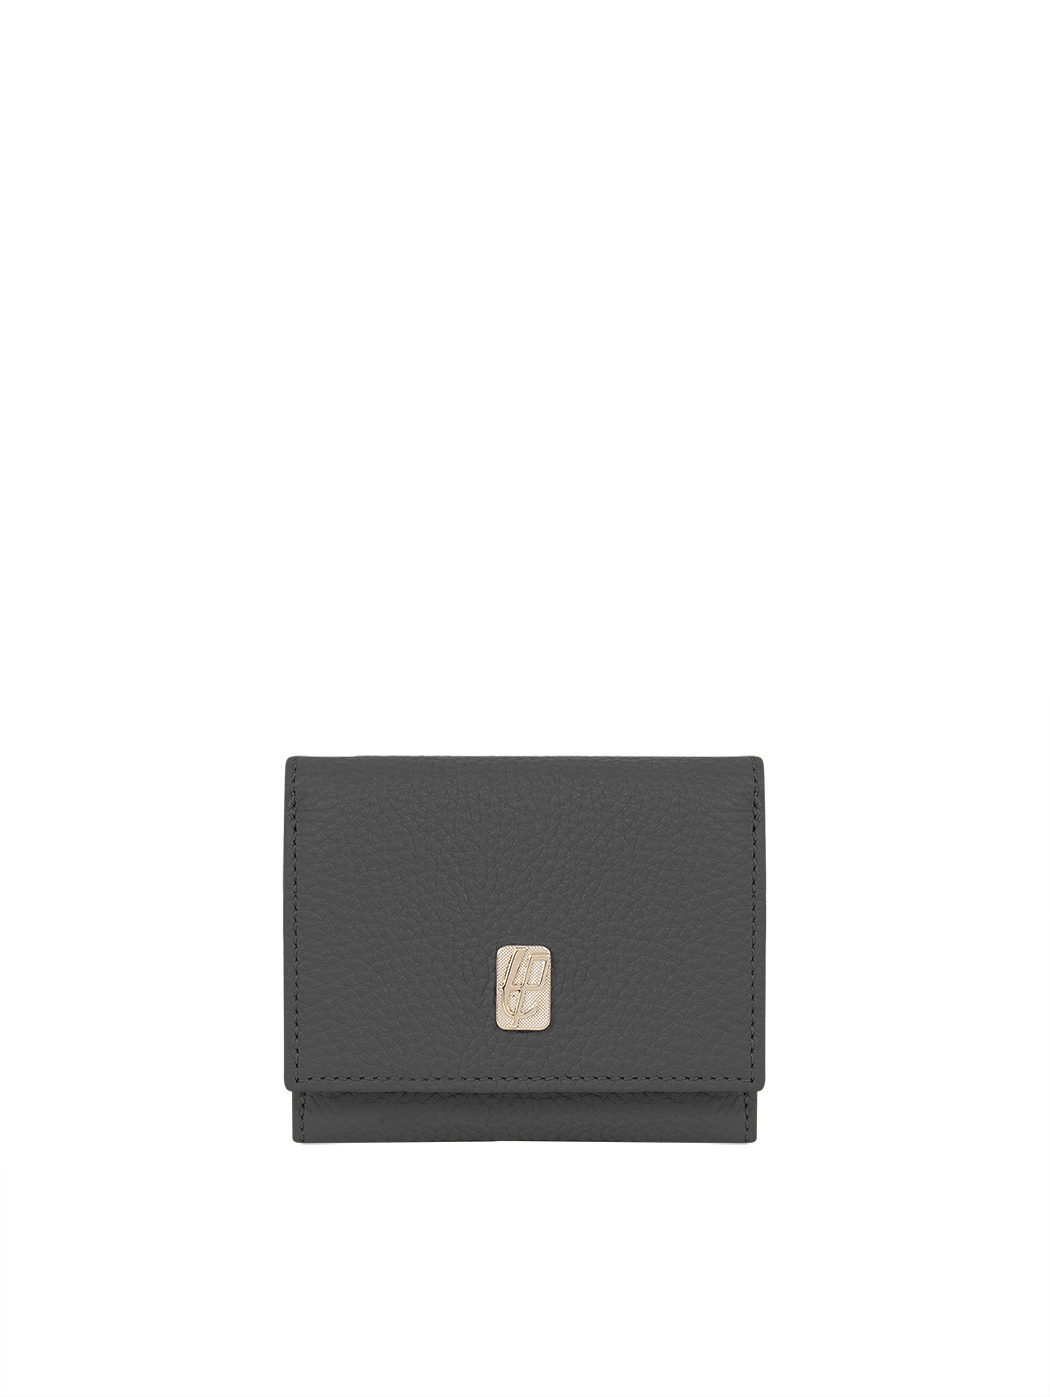 Compact Embossed Trifold Leather Wallet Black